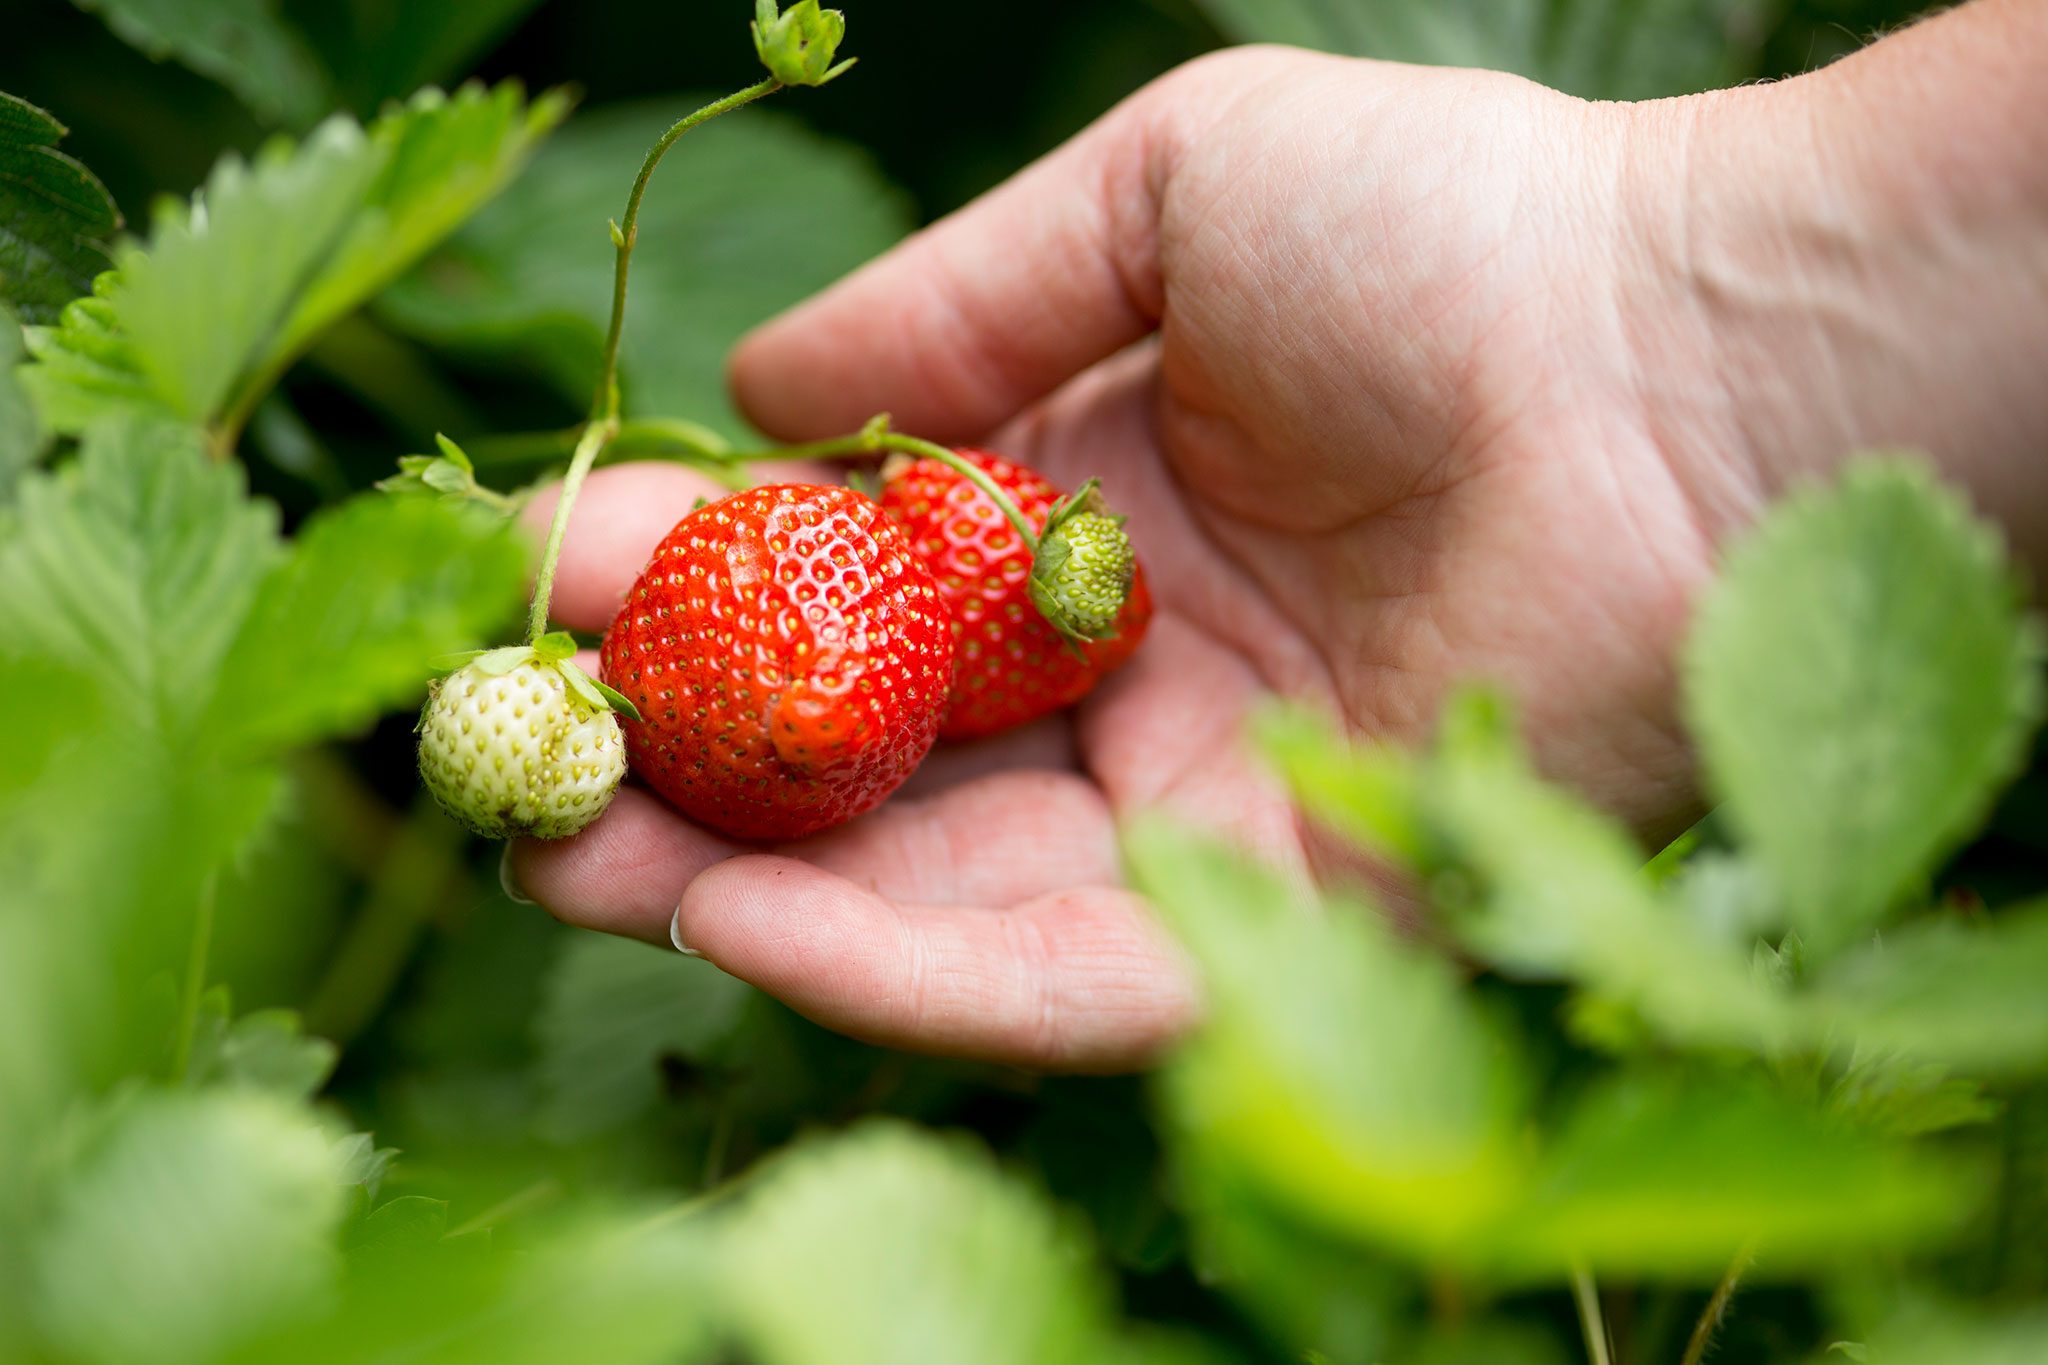 What time of day is best to pick strawberries